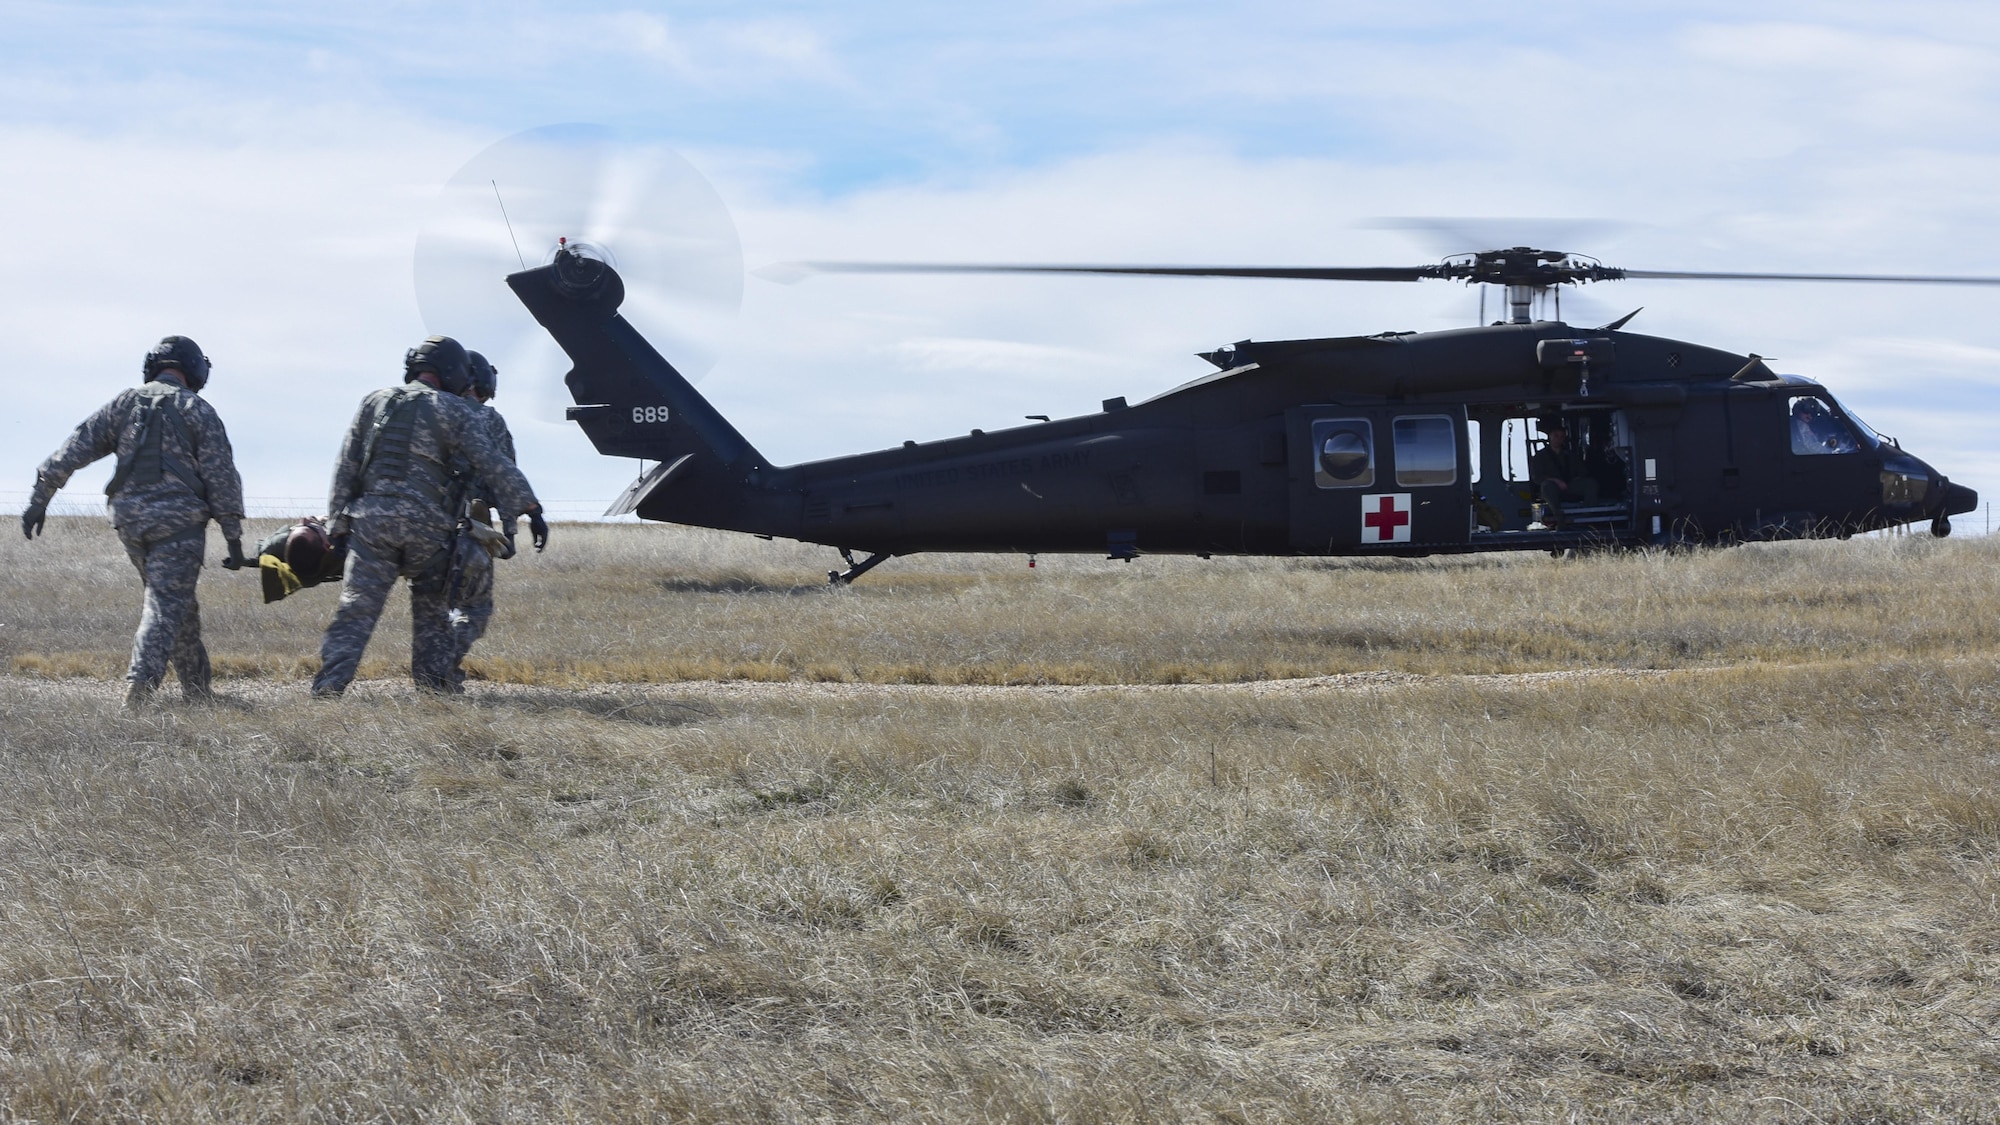 U.S. Soldiers with the South Dakota National Guard transport an Airman on a litter to an HH-60M Black Hawk helicopter during exercise Combat Raider at the Powder River Training Complex, March 15, 2017. Airmen and Soldiers participated in the joint-exercise, creating a realistic joint-operation environment. (U.S. Air Force photo by Airman 1st Class Randahl J. Jenson)